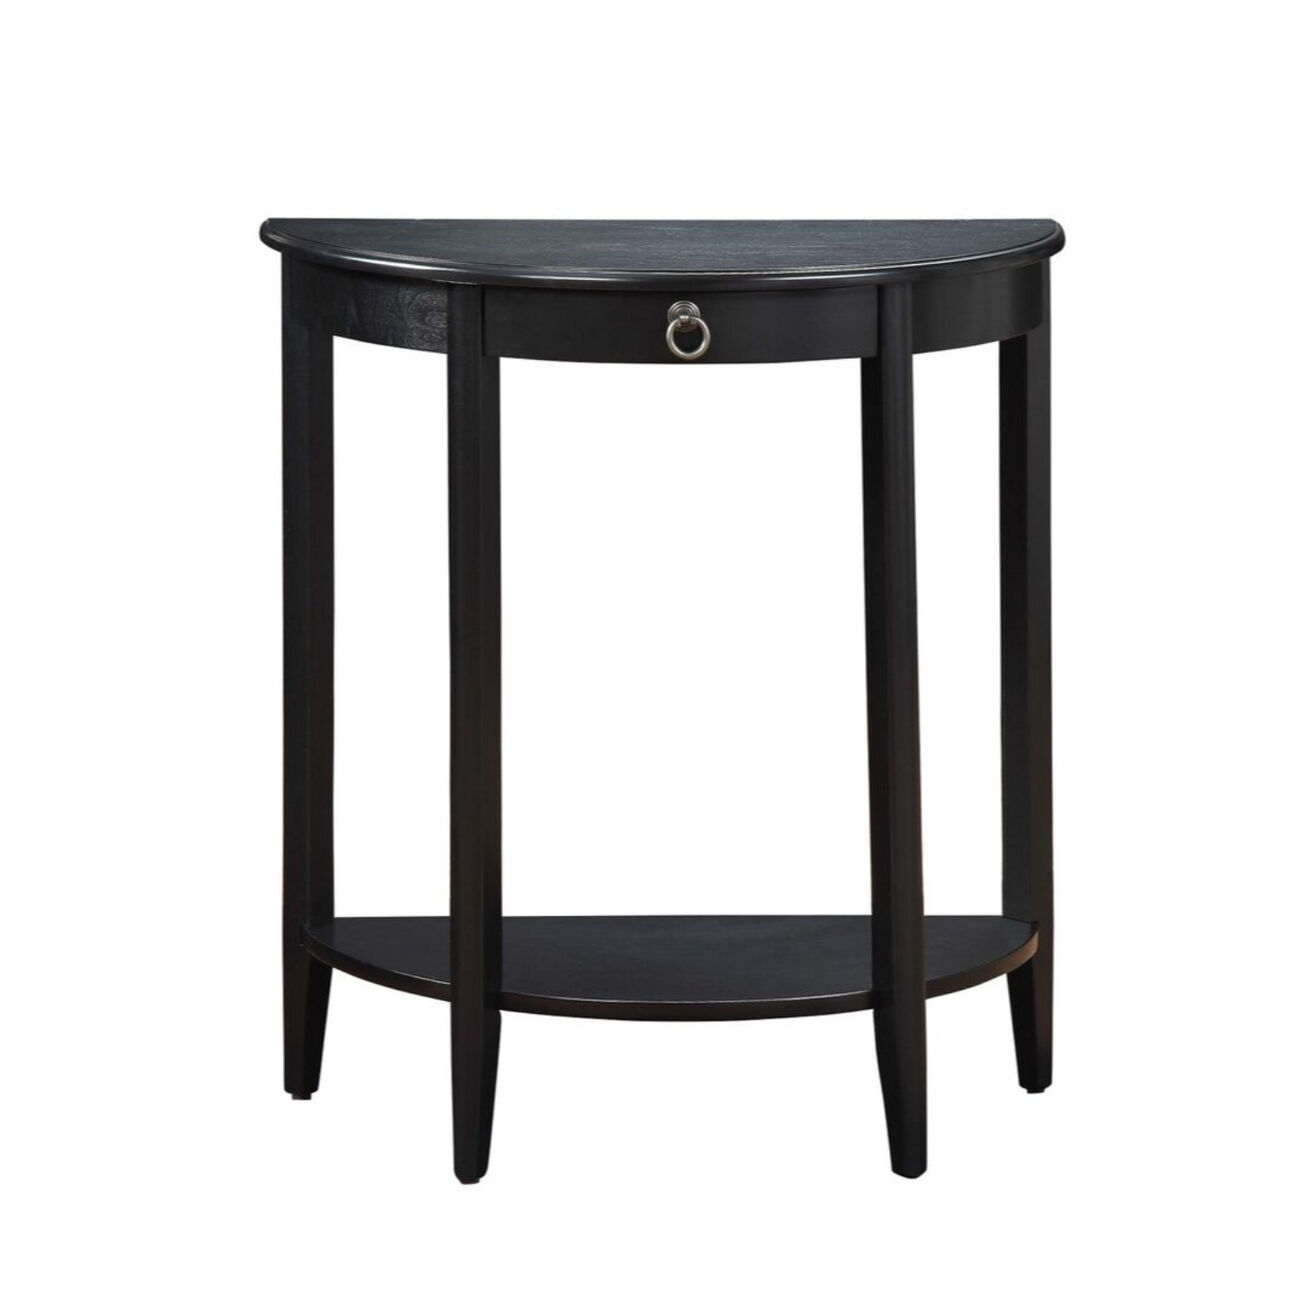 Wooden Half Moon Shaped Console Table with One Storage Drawer, Black